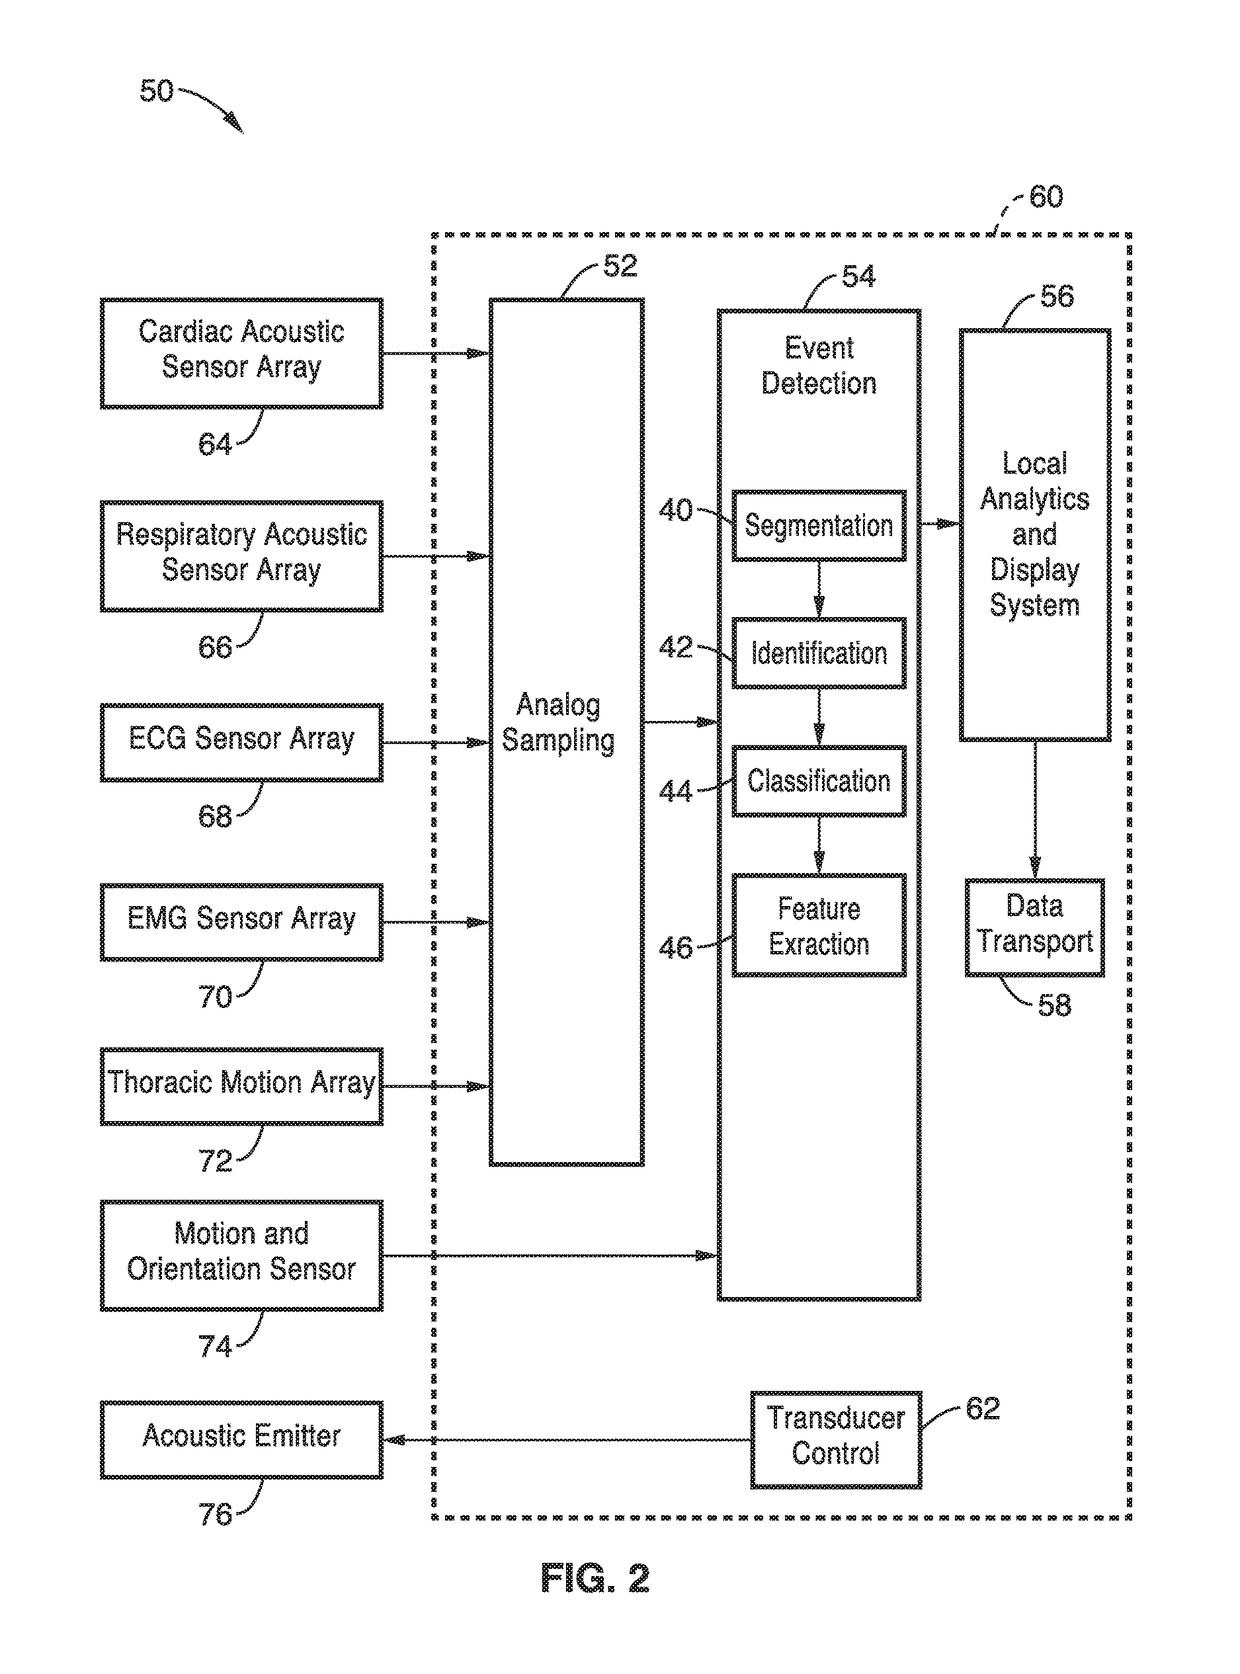 Multisensor physiological monitoring systems and methods